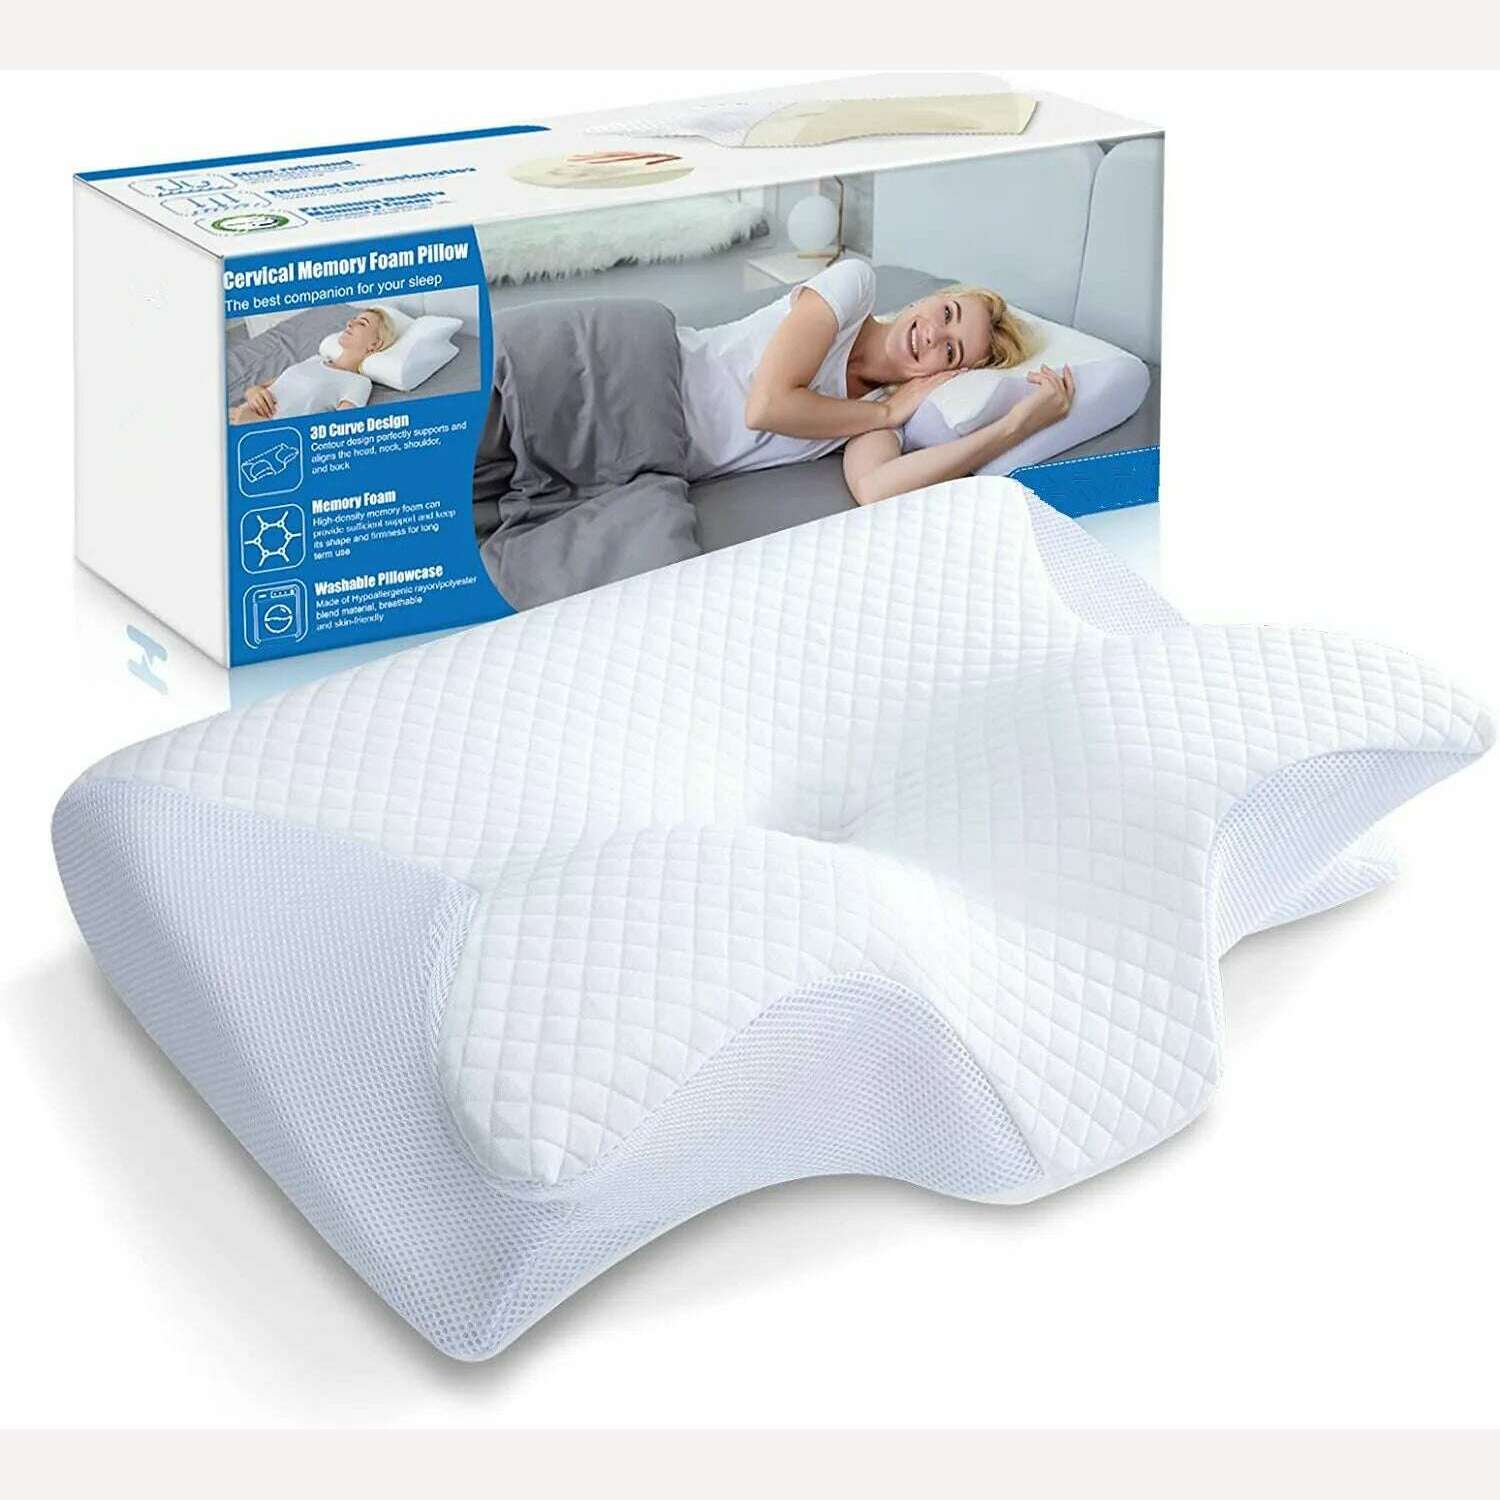 KIMLUD, Cervical Memory Foam Pillow Contour Pillow for Neck and Shoulder Pain Orthopedic Sleep Neck Contour Pillow for Side Sleeping, WHITE / No box, KIMLUD Women's Clothes